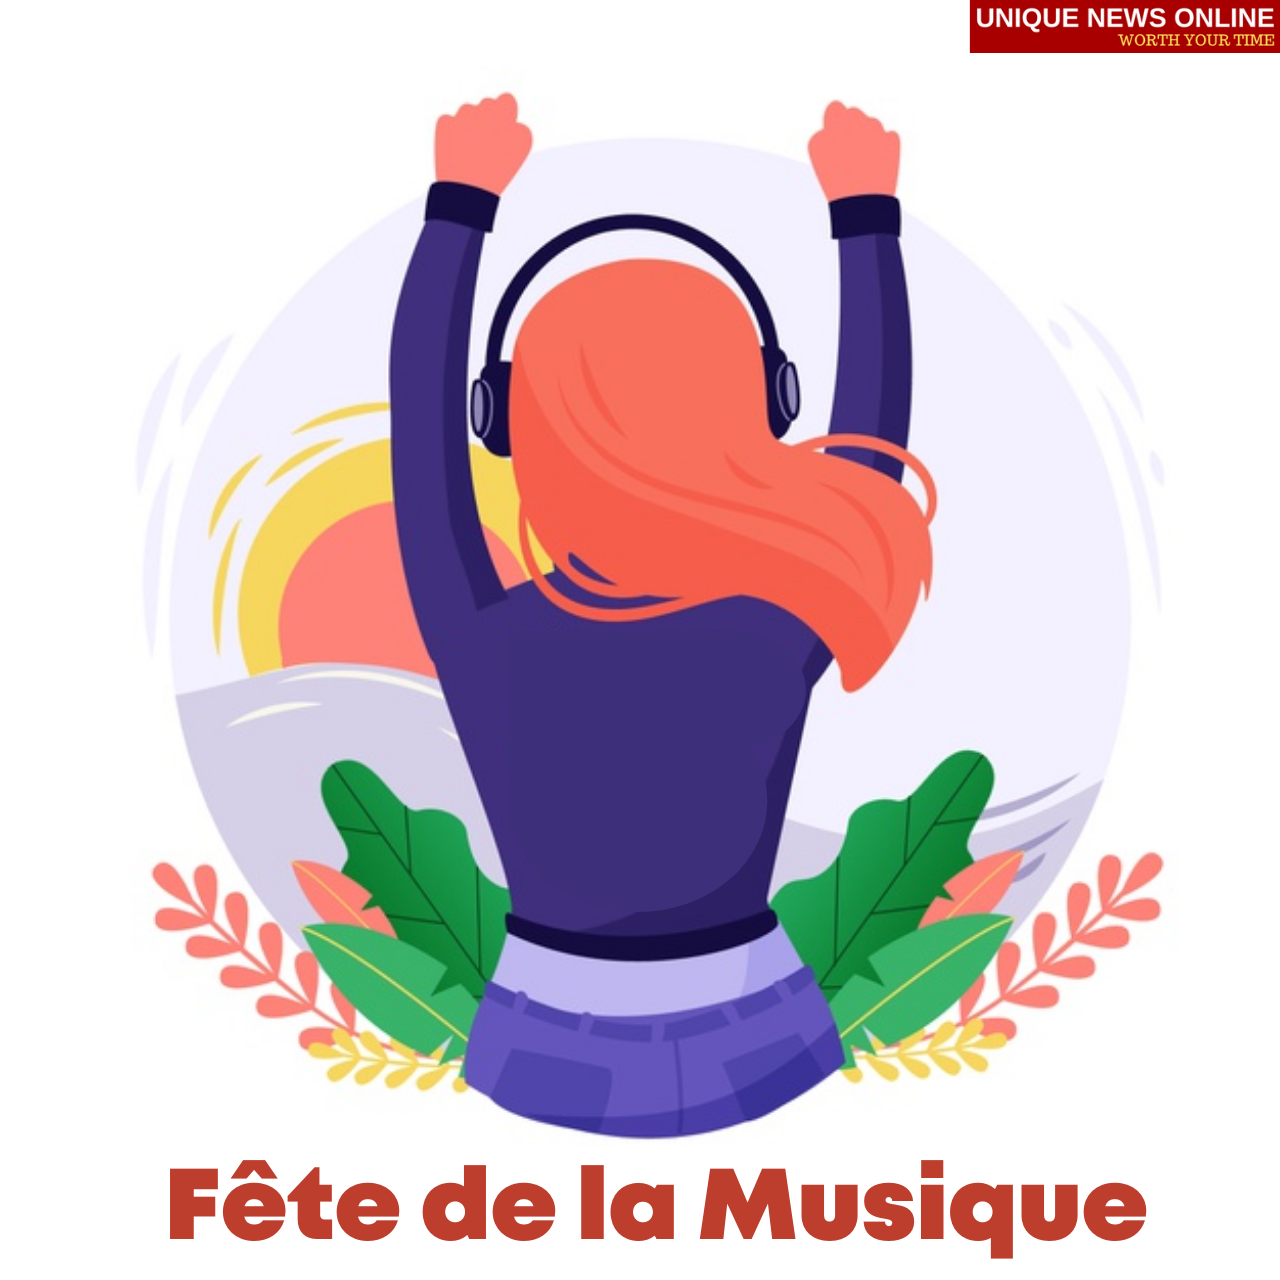 Fête de la Musique 2021 Quotes, Wishes, Messages, and Greetings to greet Music Lovers